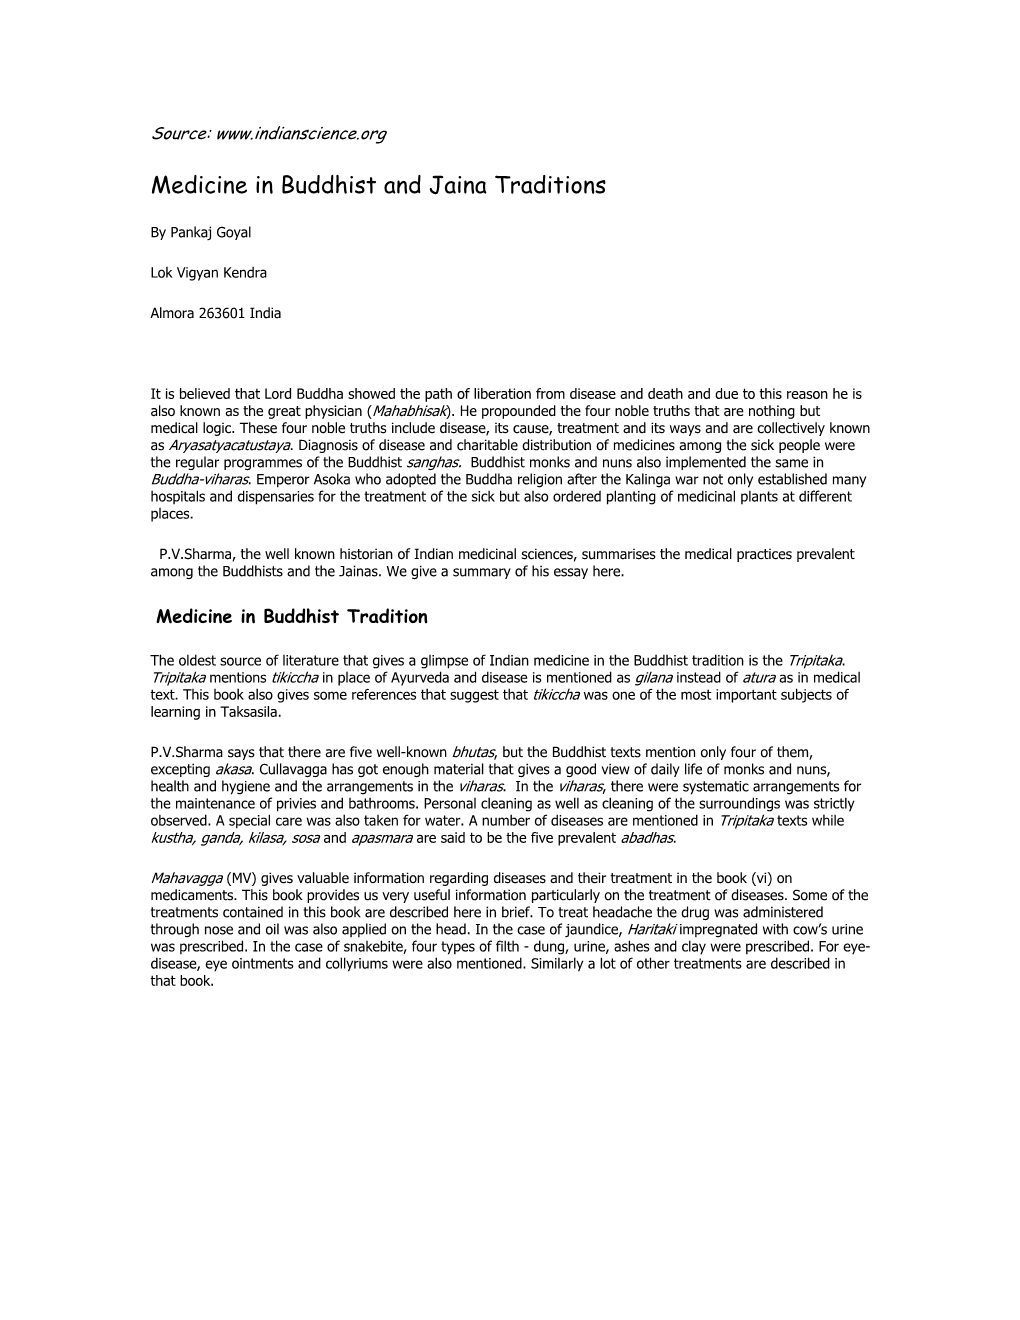 Medicine in Buddhist and Jaina Traditions